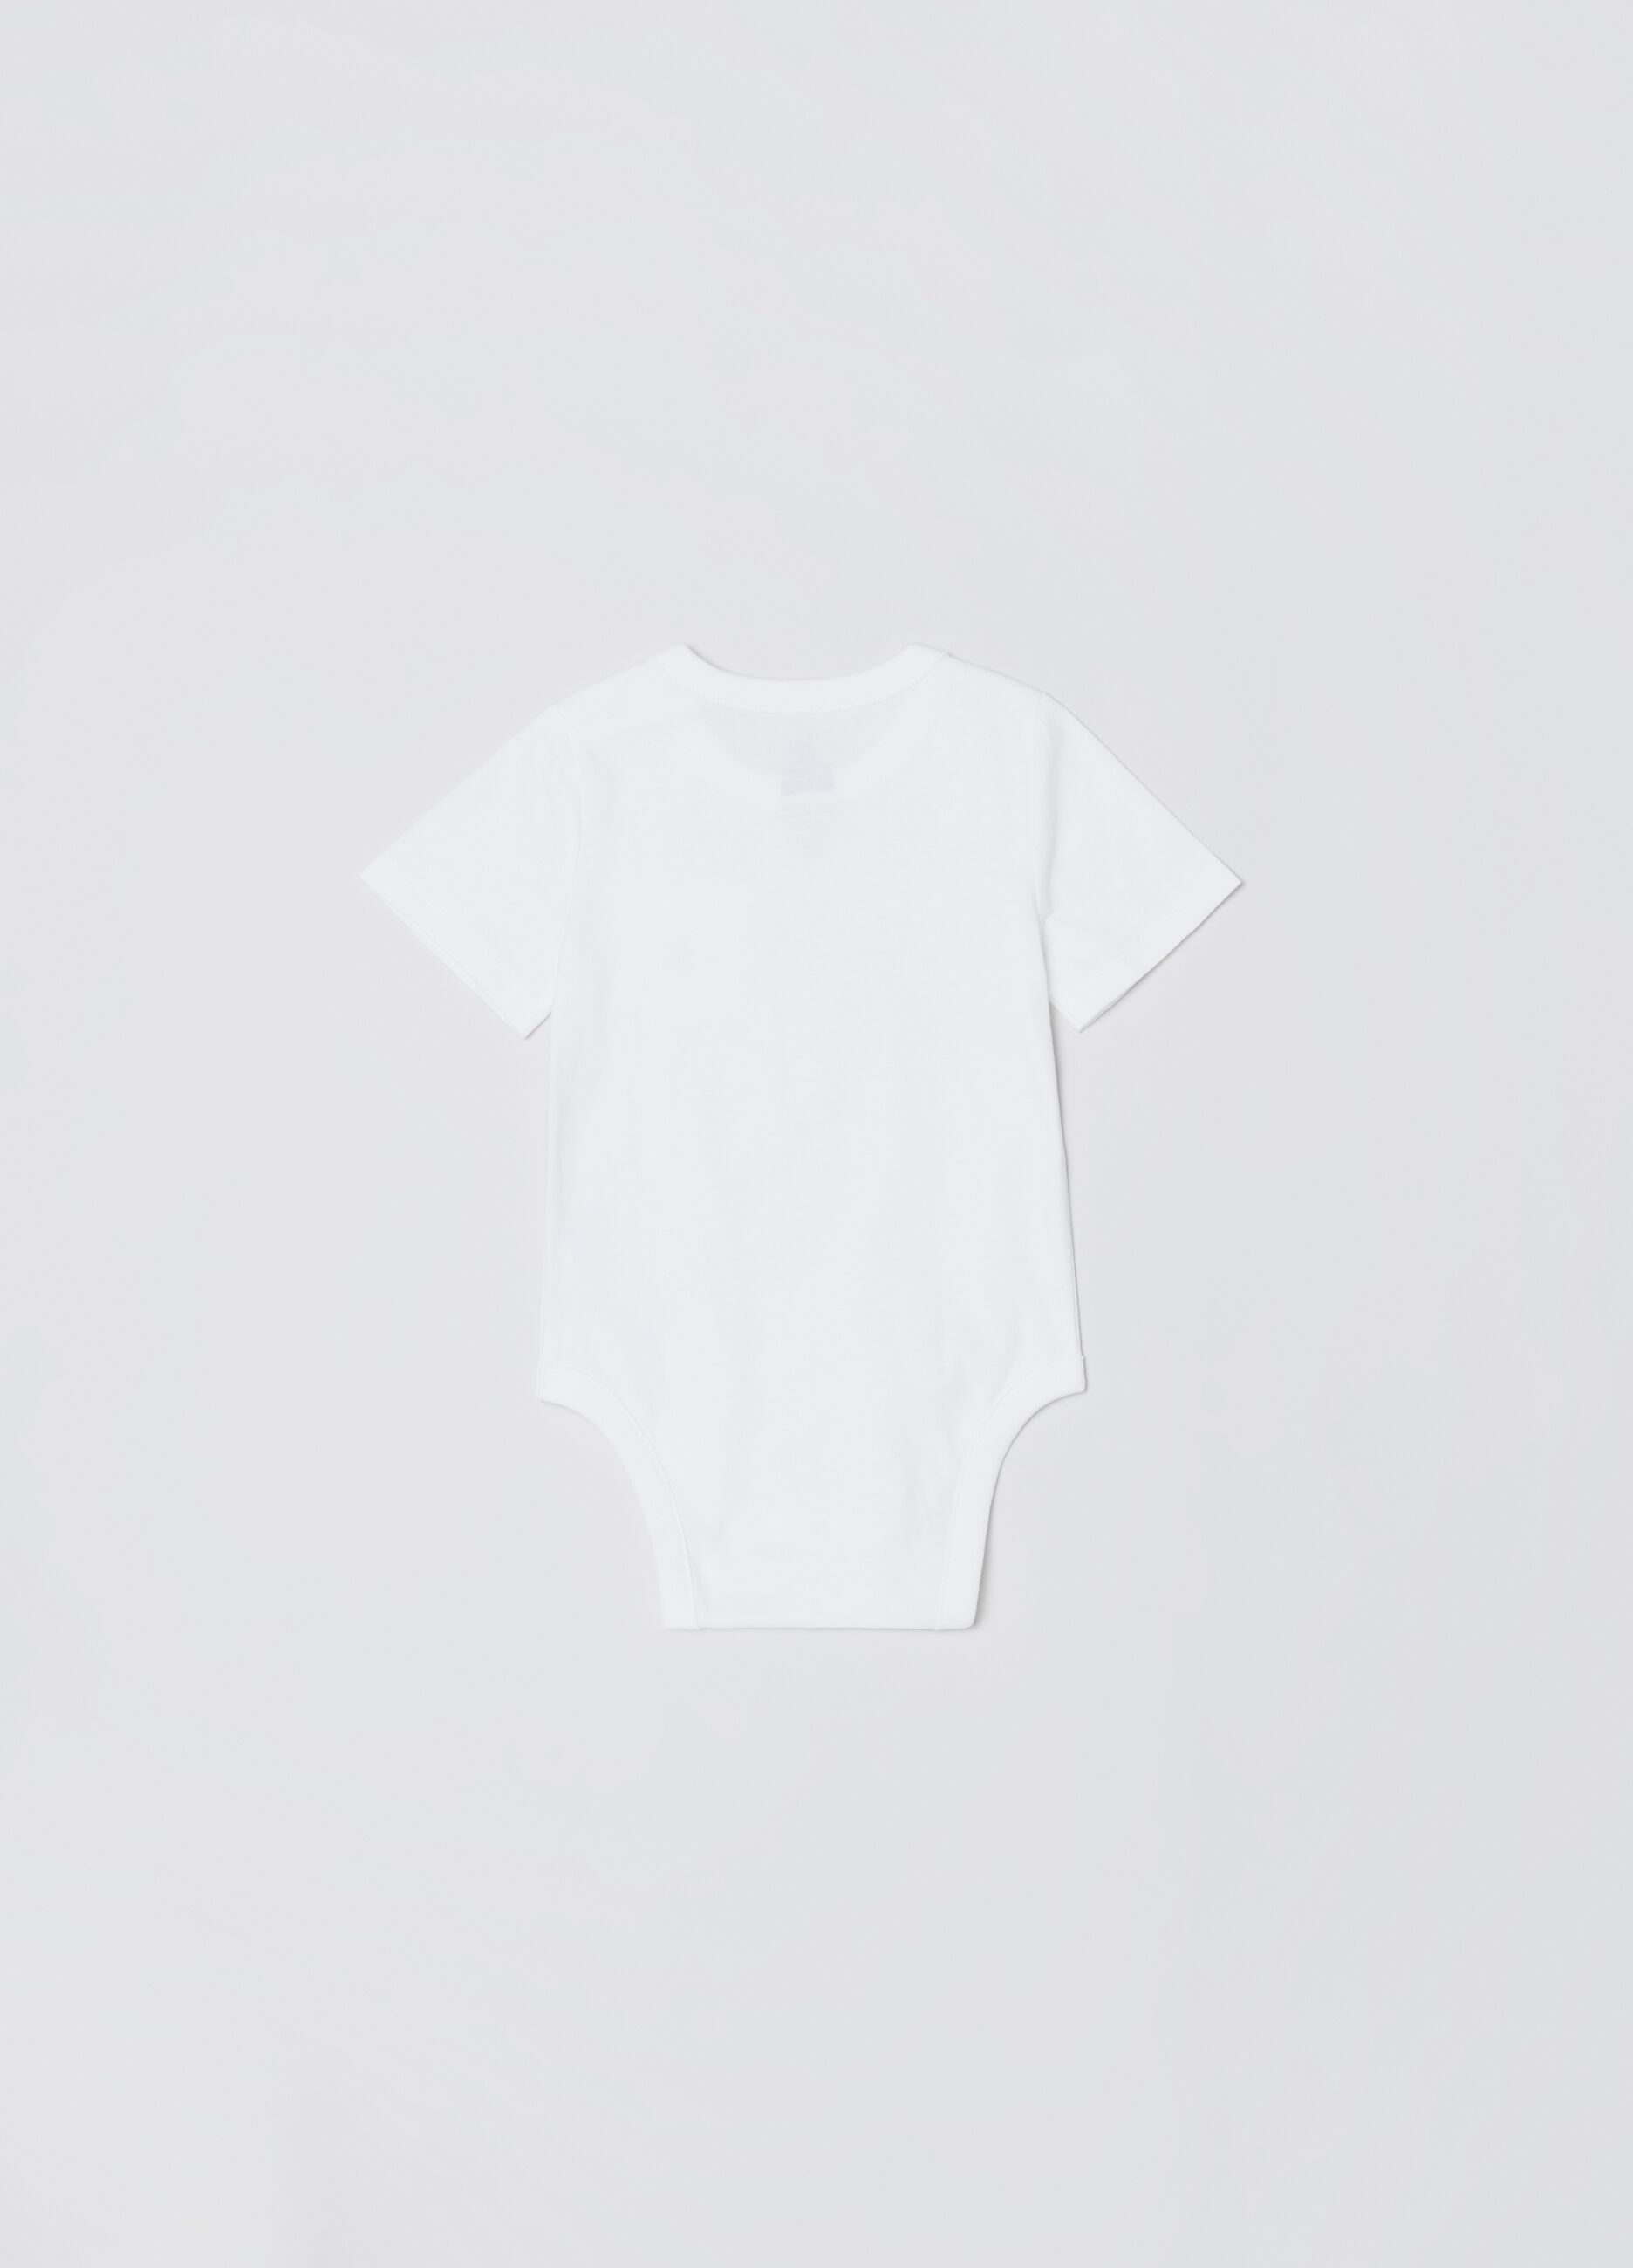 Cotton bodysuit with pocket and embroidered bear